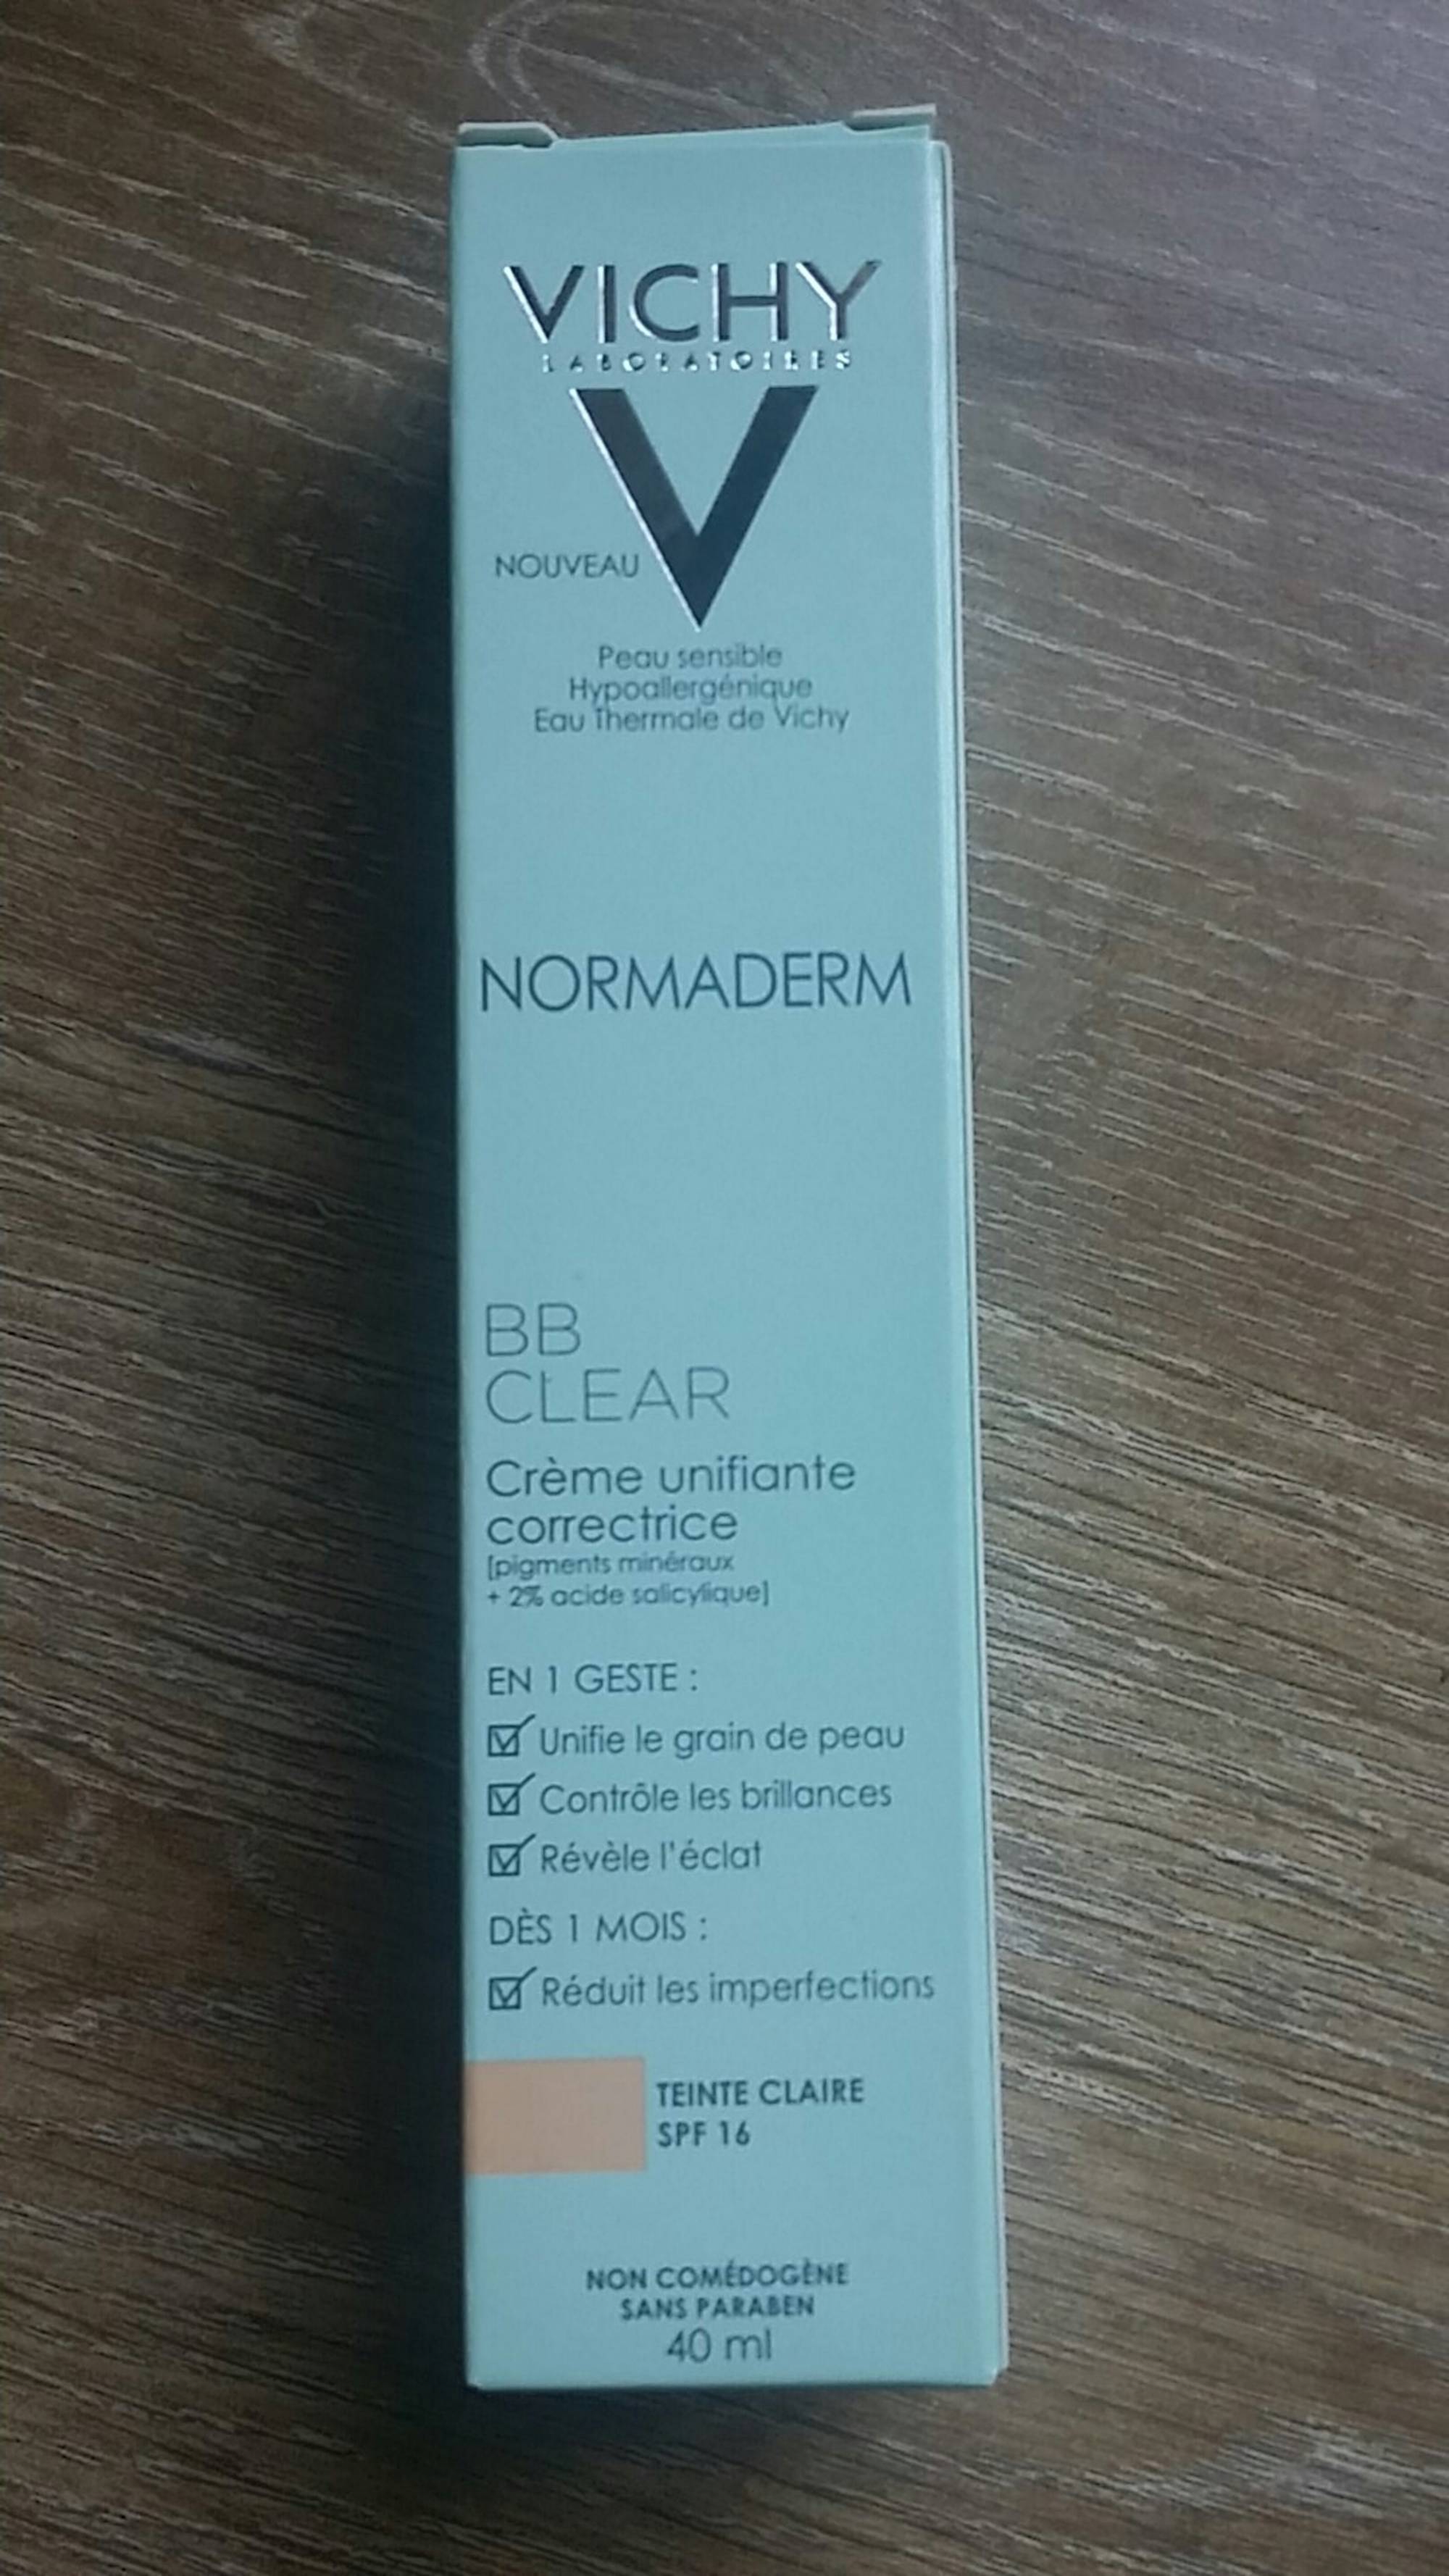 VICHY - Normaderm - BB clear crème unifiante correctrice - Teinte claire SPF16